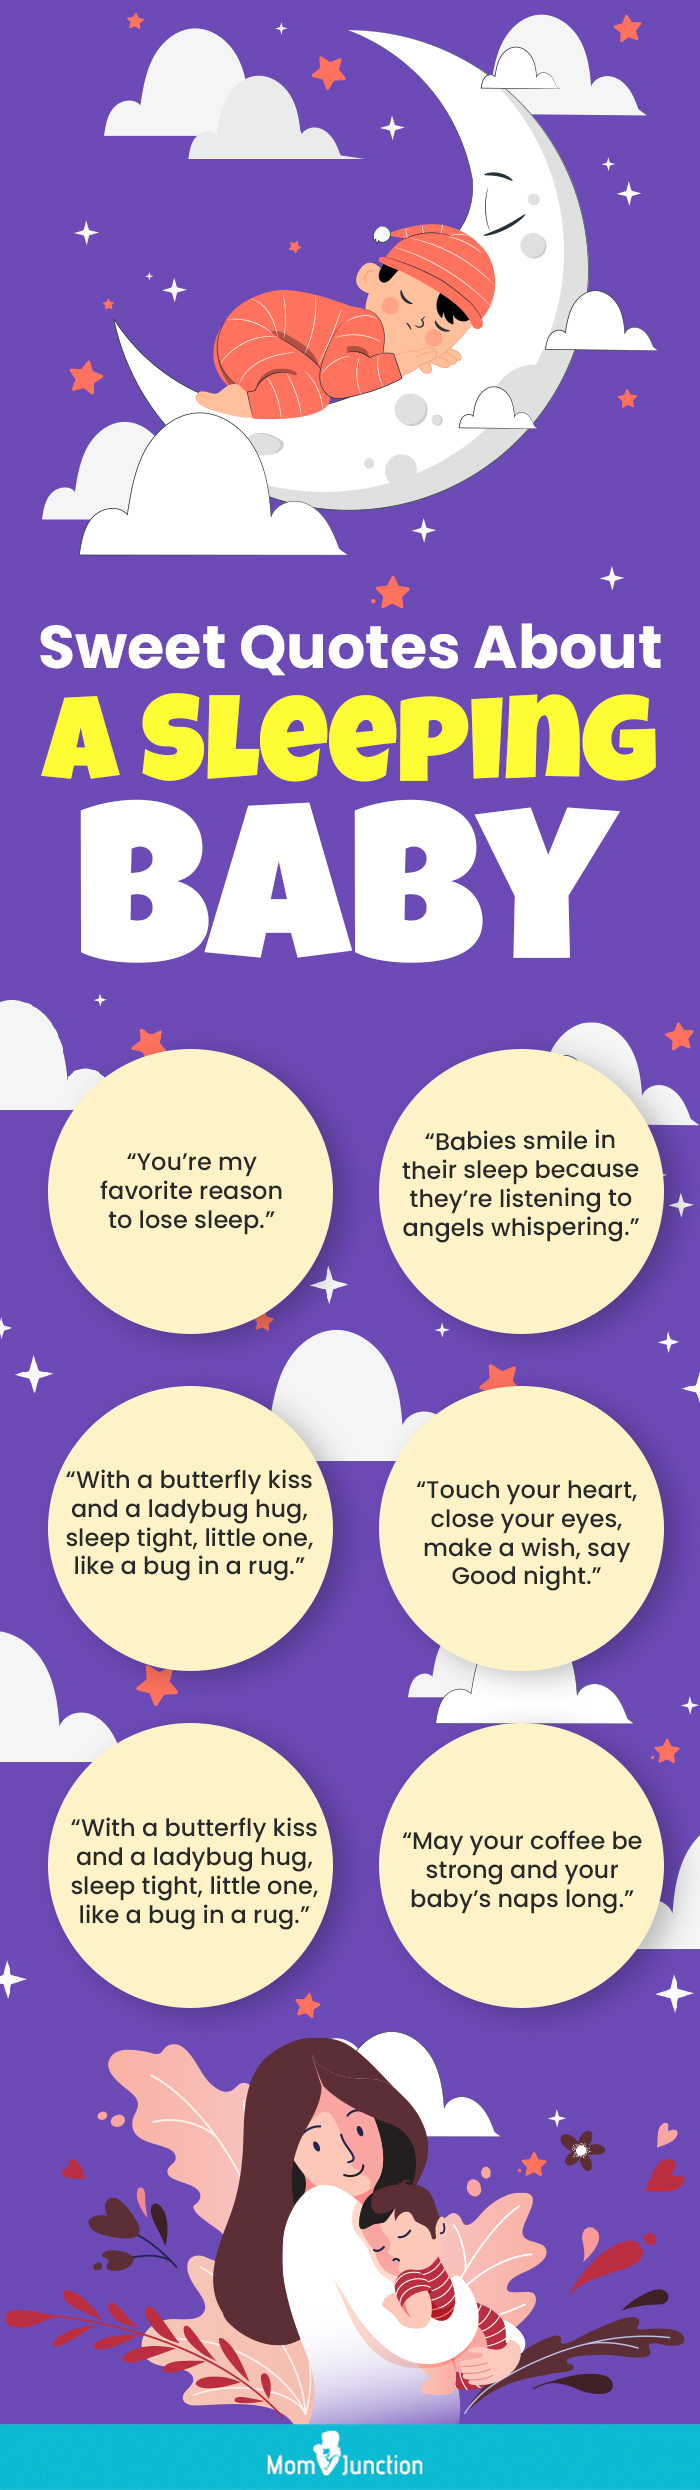 sweet quotes about a sleeping baby (infographic)